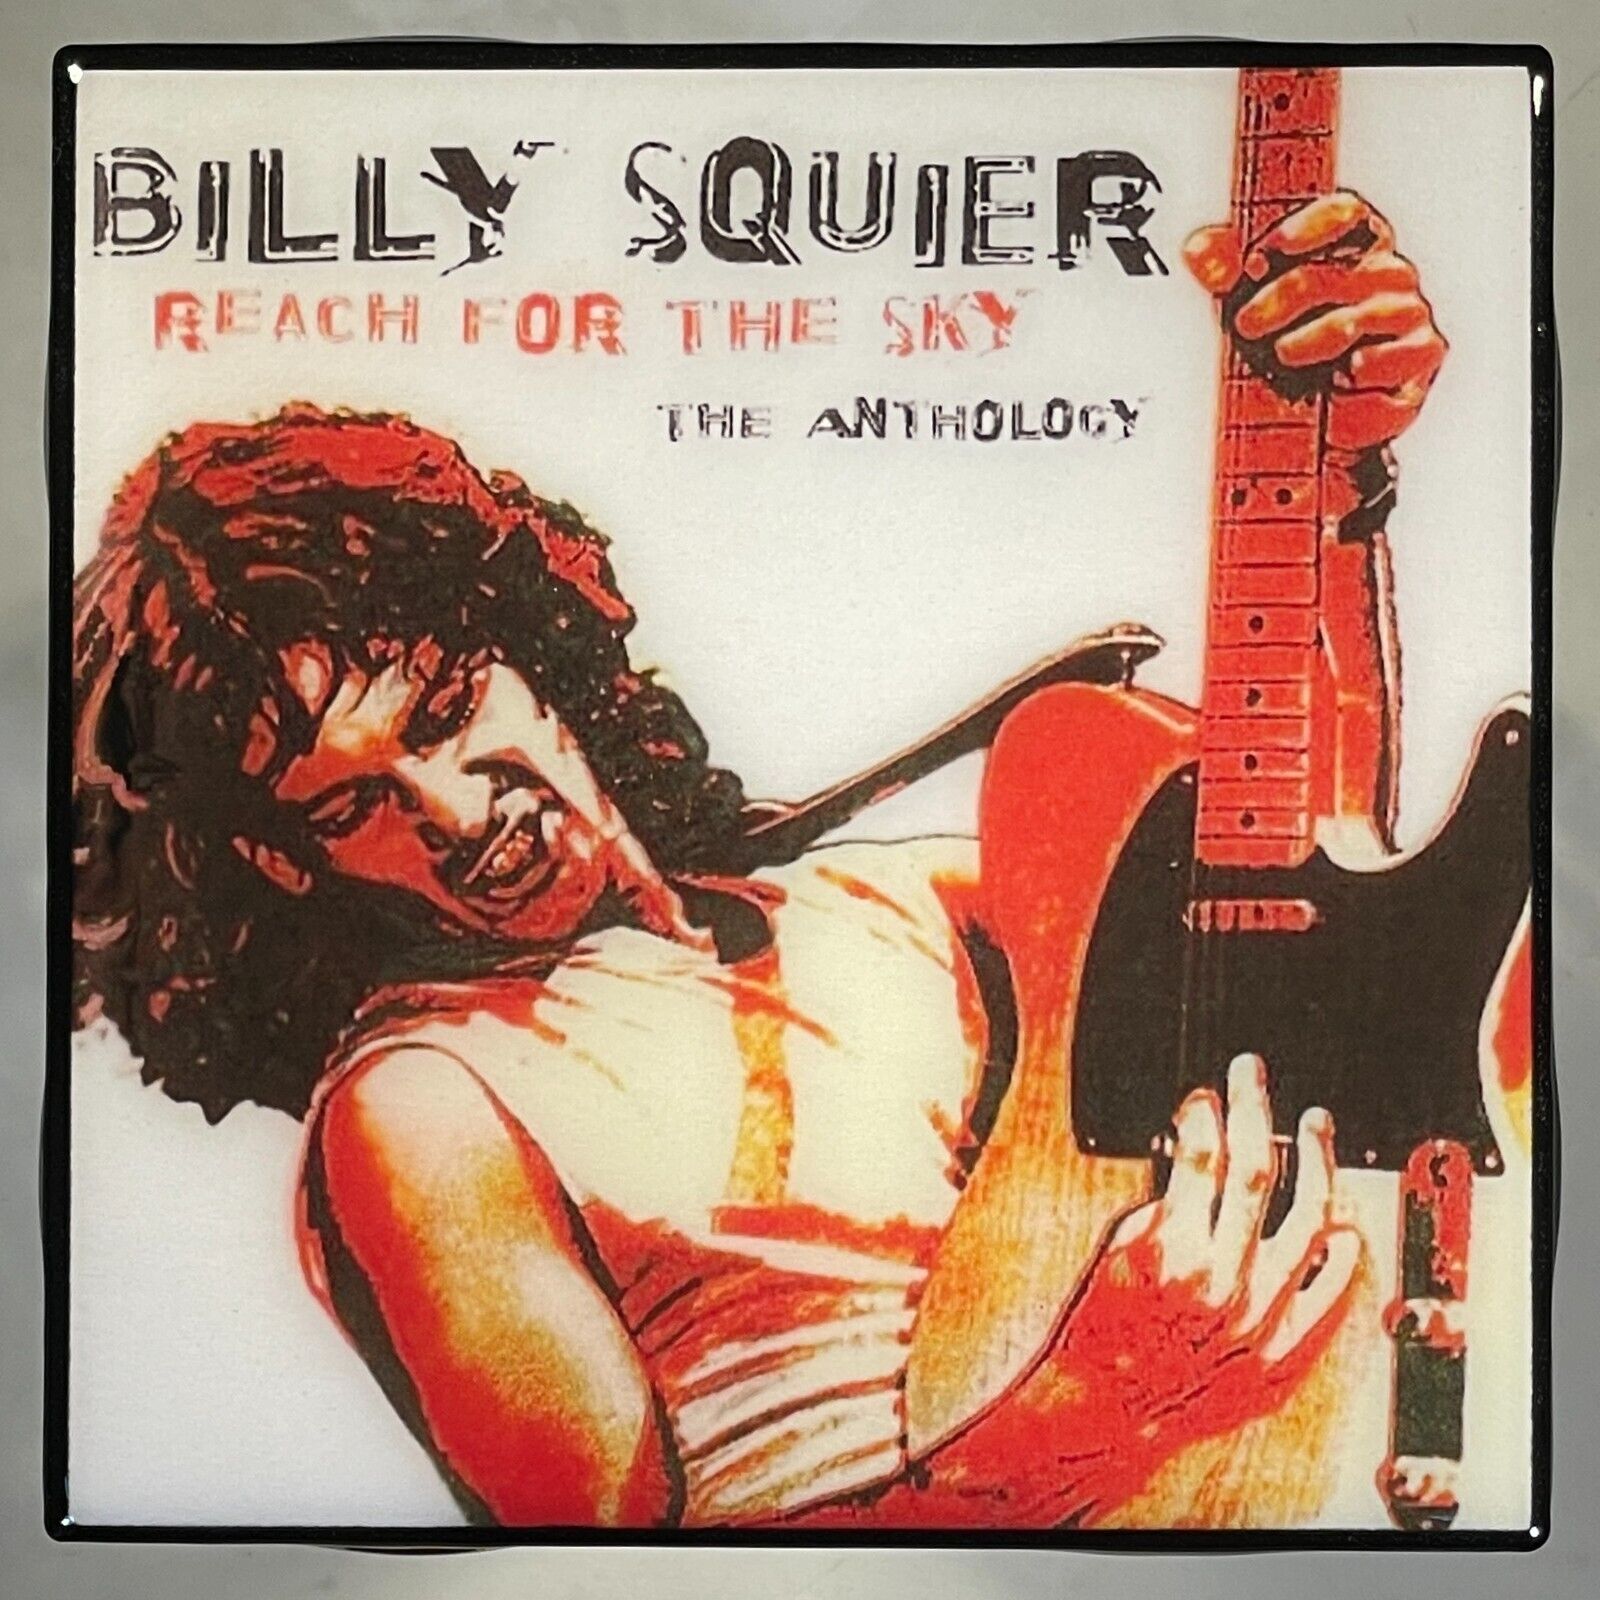 BILLY SQUIER Reach For The Sky The Anthology Coaster Custom Ceramic Tile